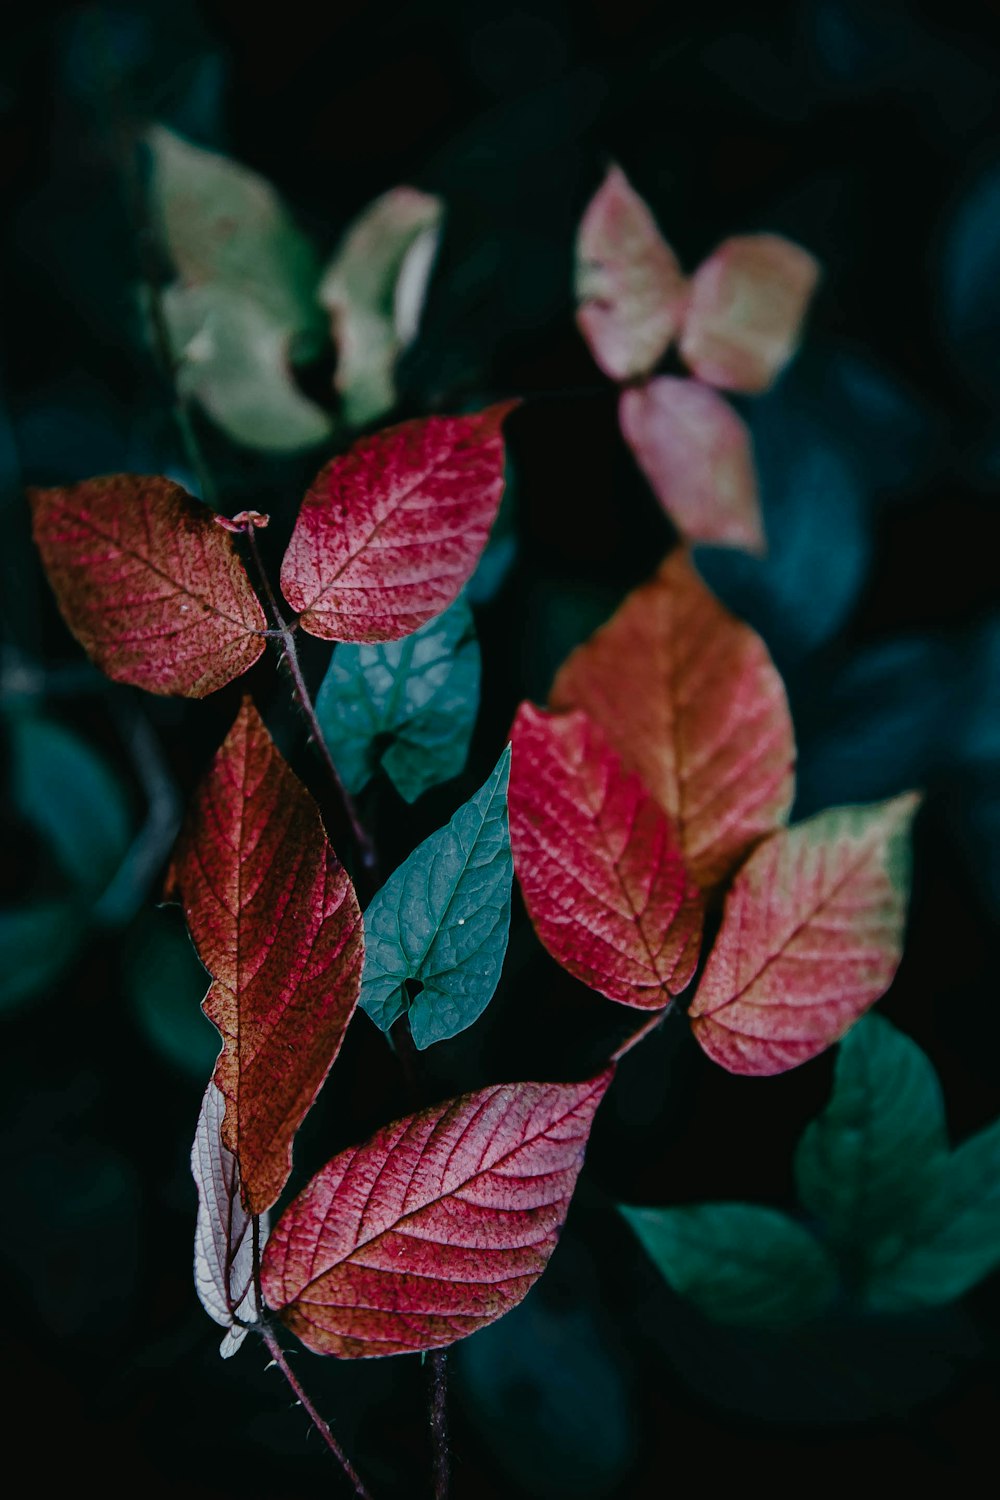 red and green leaves in close up photography photo – Free Brown Image ...